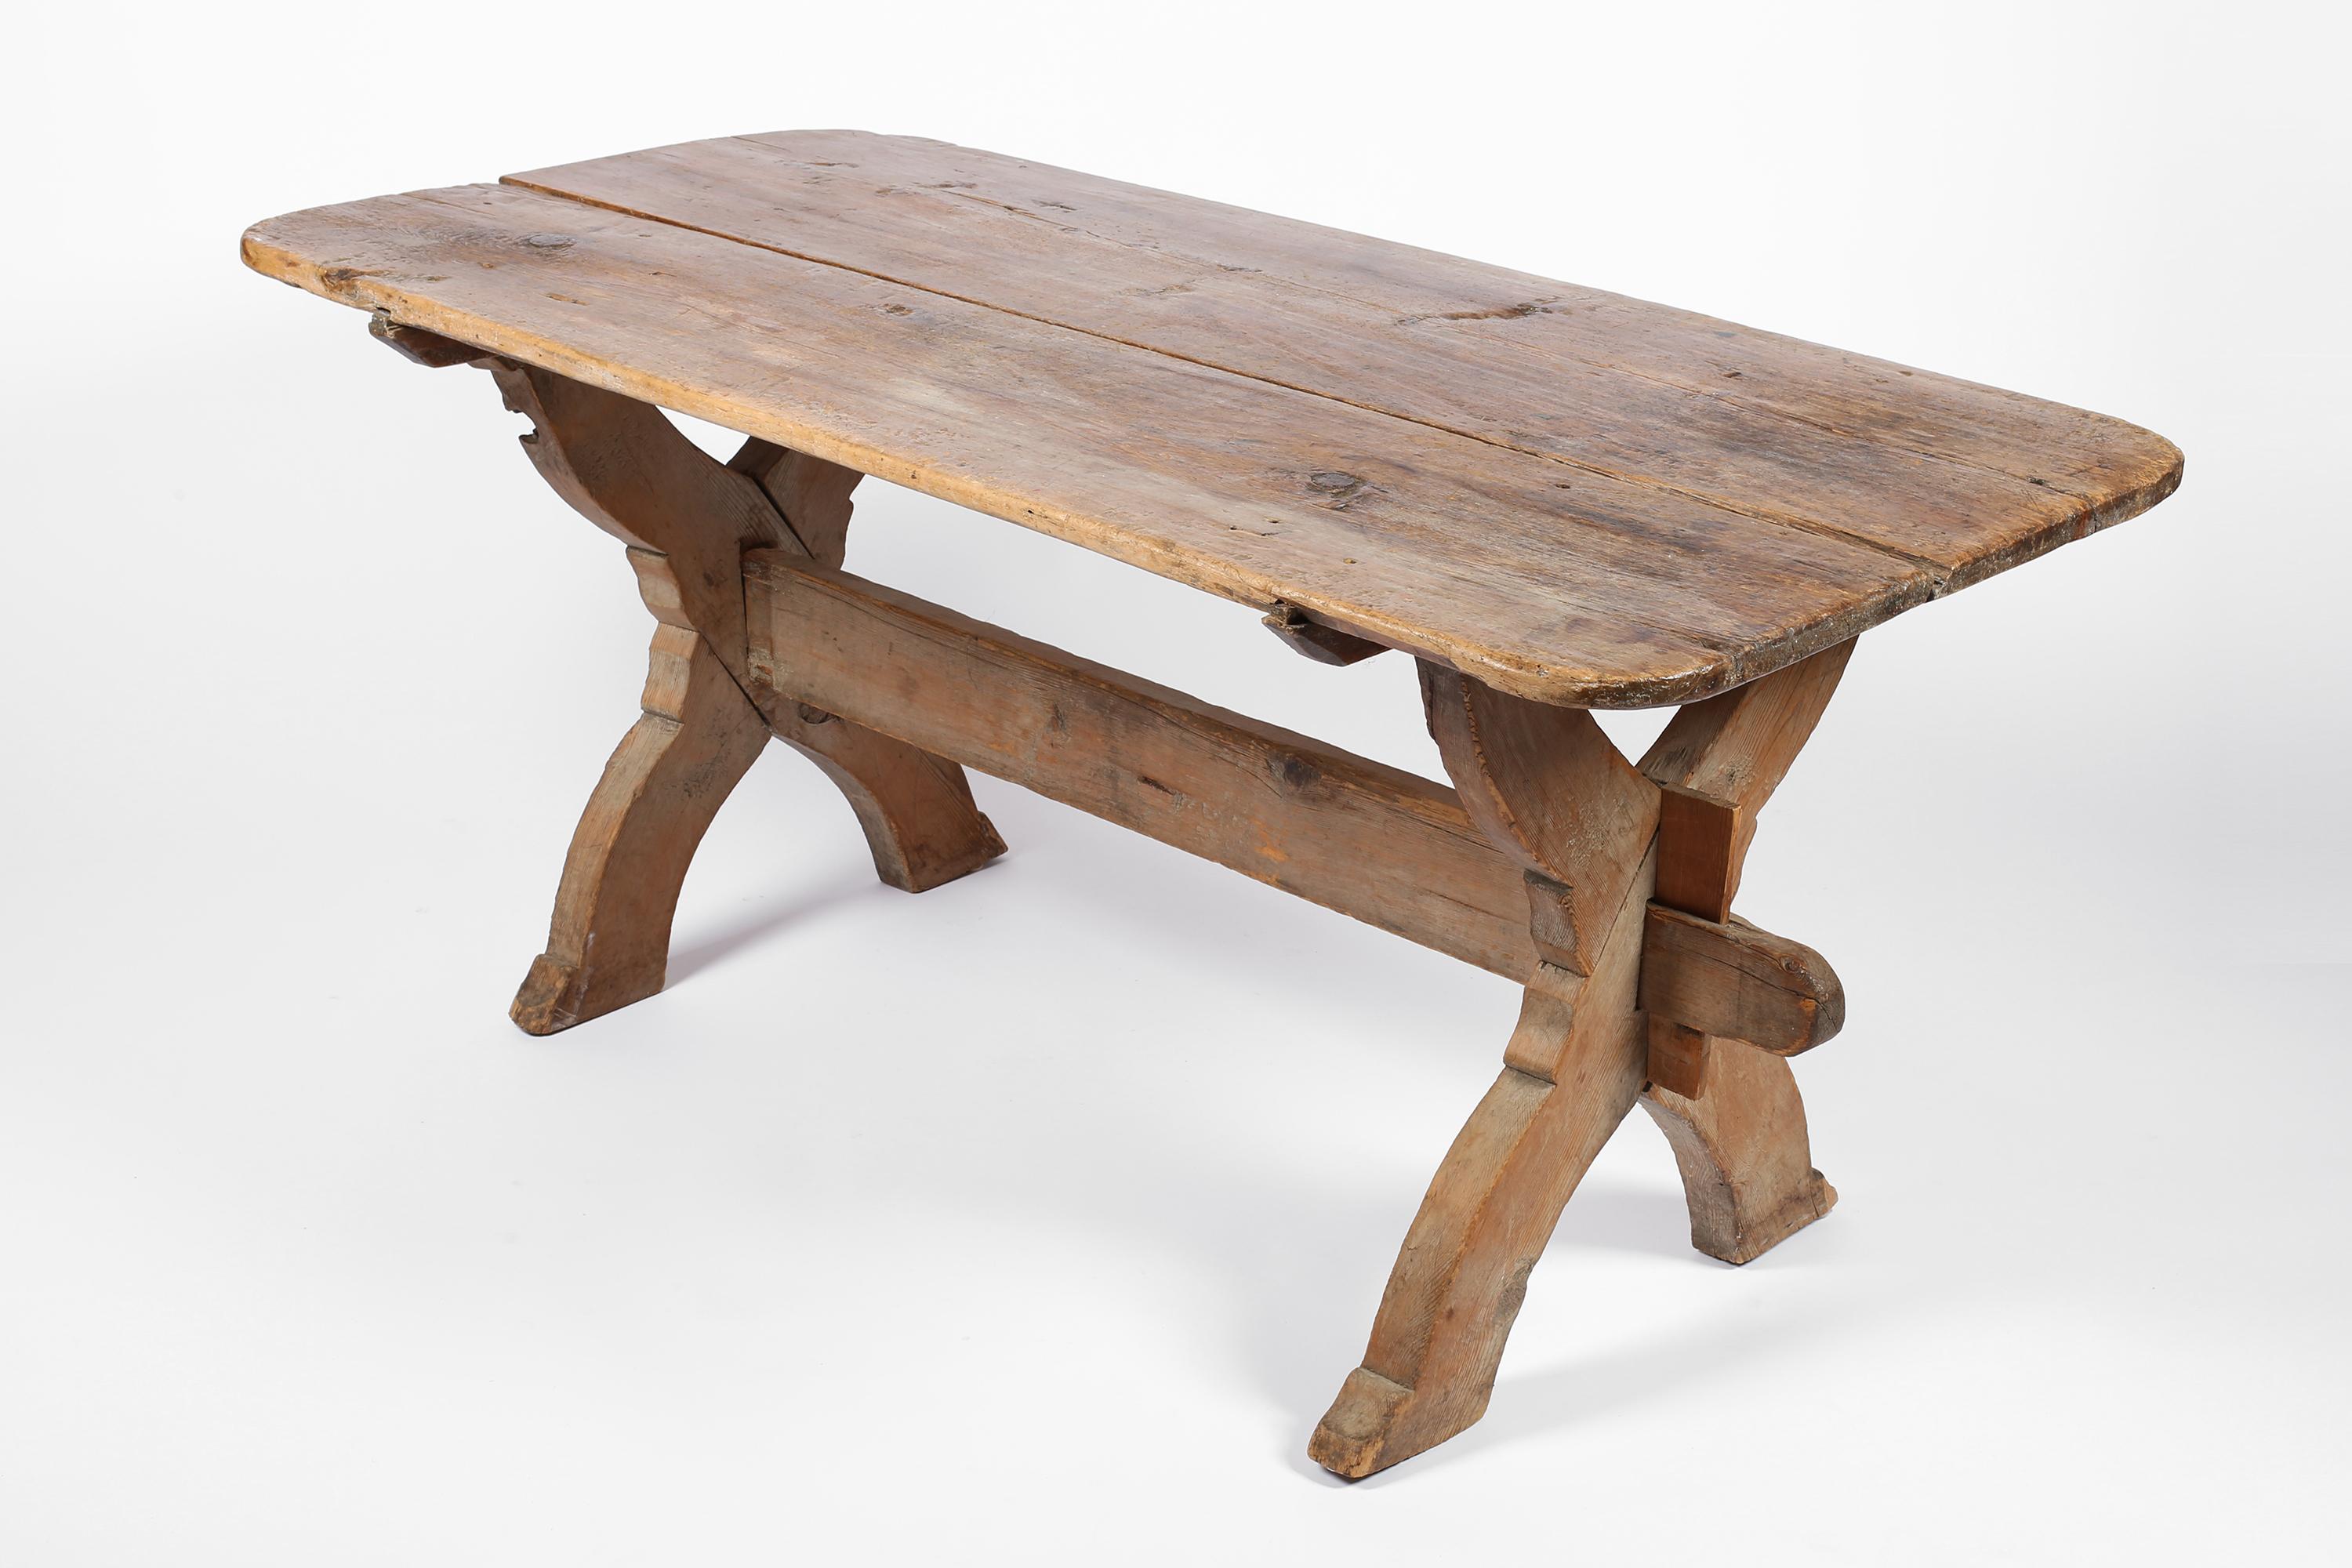 A charming early 19th century ‘bockbord’ dining table in heavily patinated pine timber. Featuring carved cross supports and a central stretcher fixed with pegs. To comfortably seat six, or suitable to be used as a centre/console table. Swedish, c.